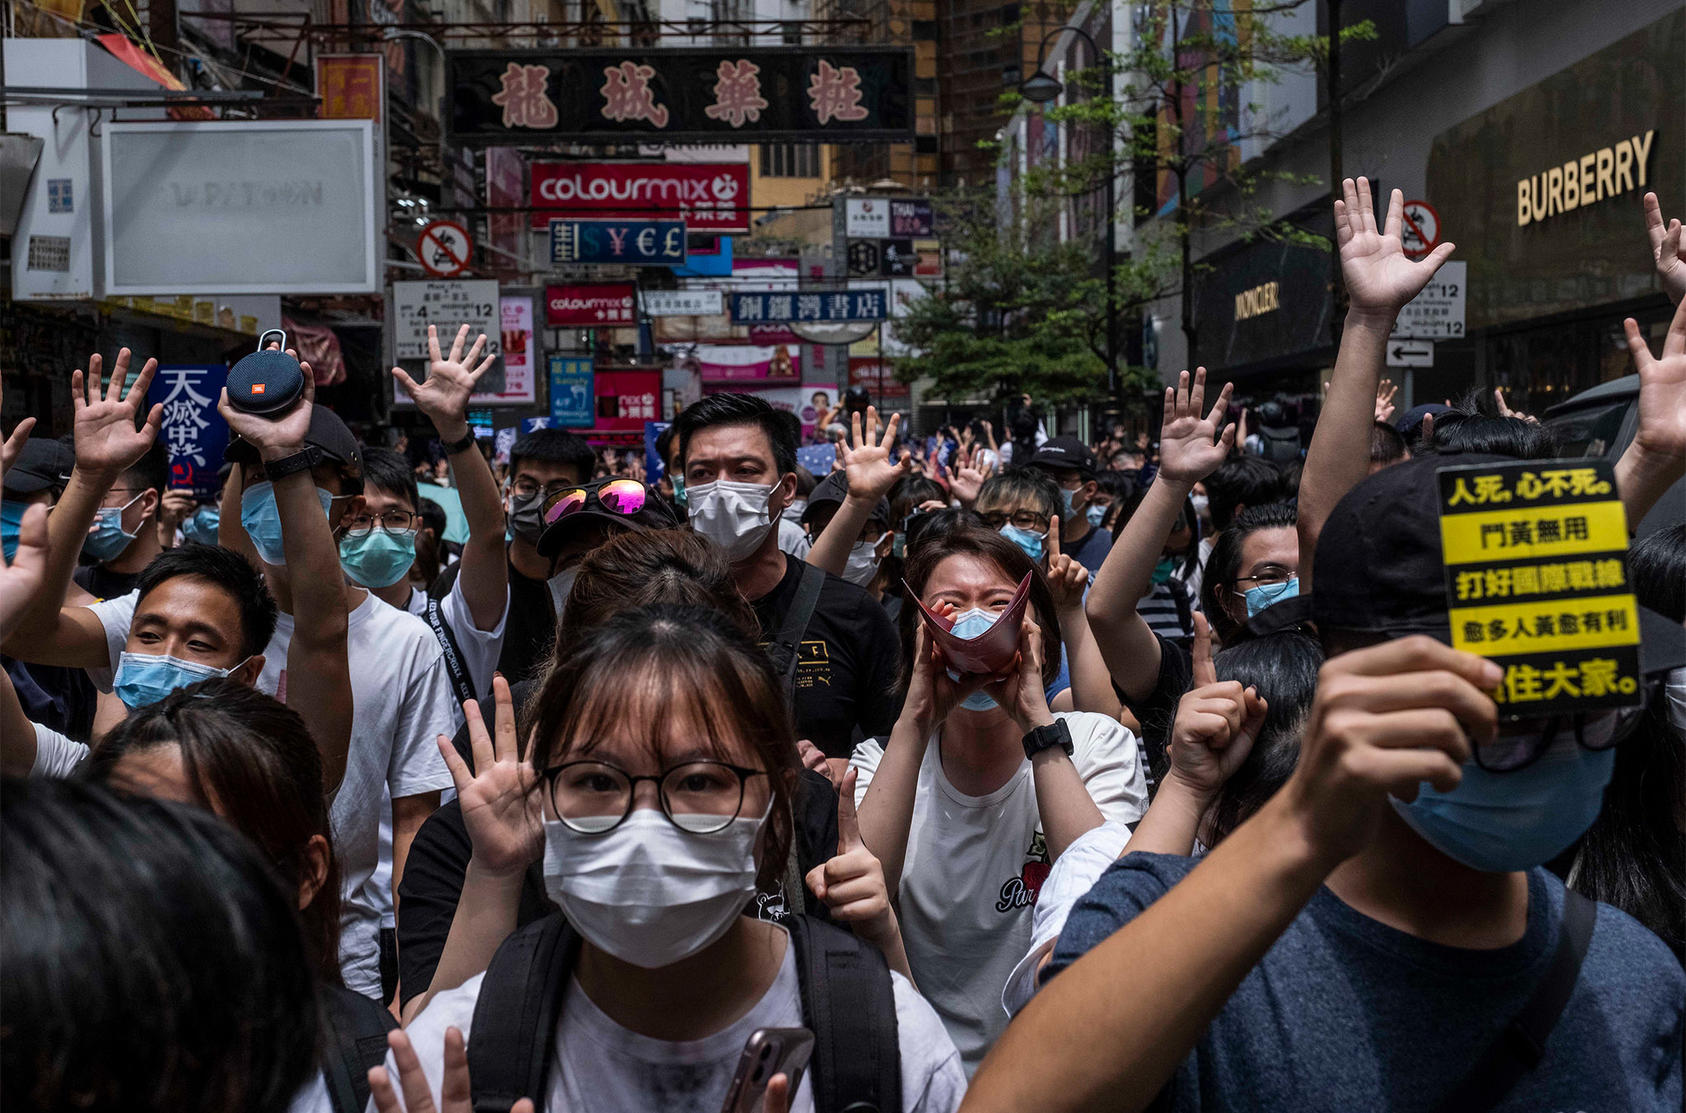 Protesters gather against new security laws in Hong Kong, May 24, 2020. (Lam Yik Fei/The New York Times)